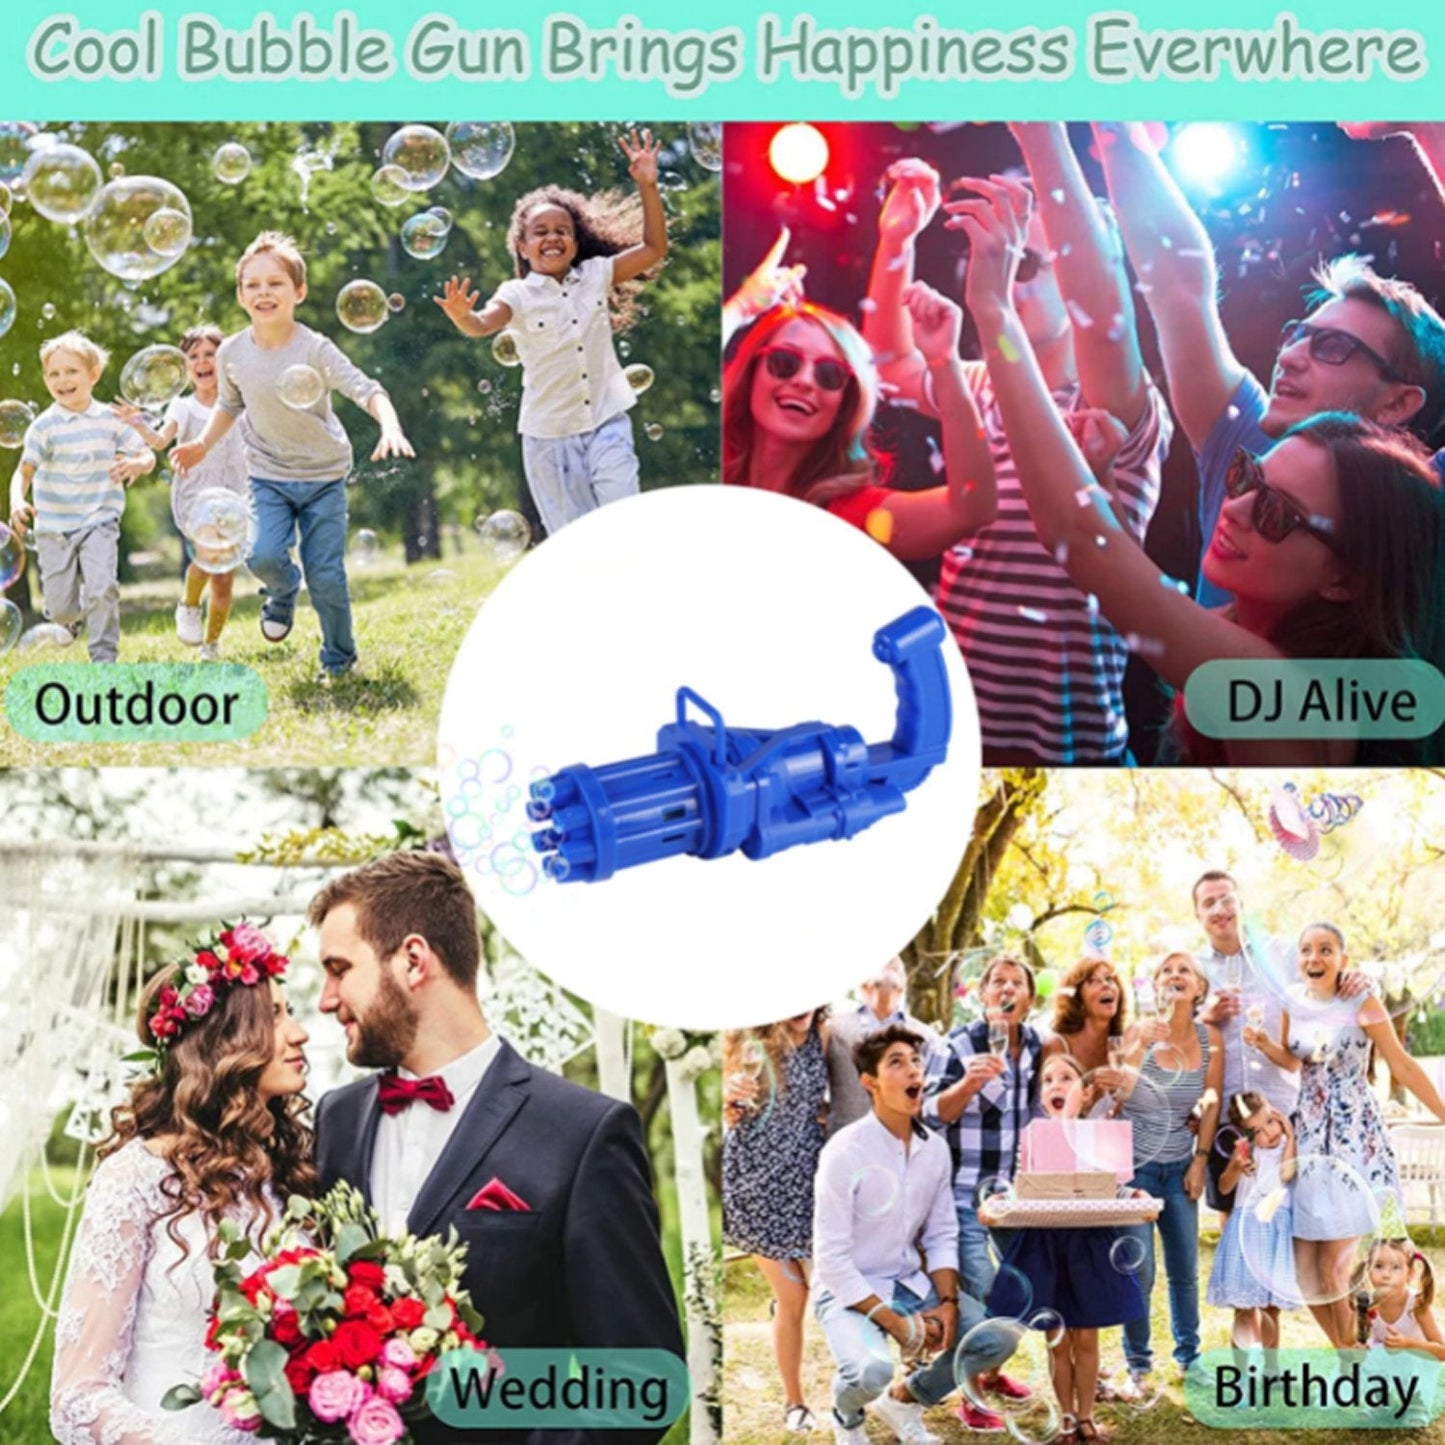 8028A Gatling Bubble Gun and launcher Used for making and producing bubbles, especially for kids. DeoDap